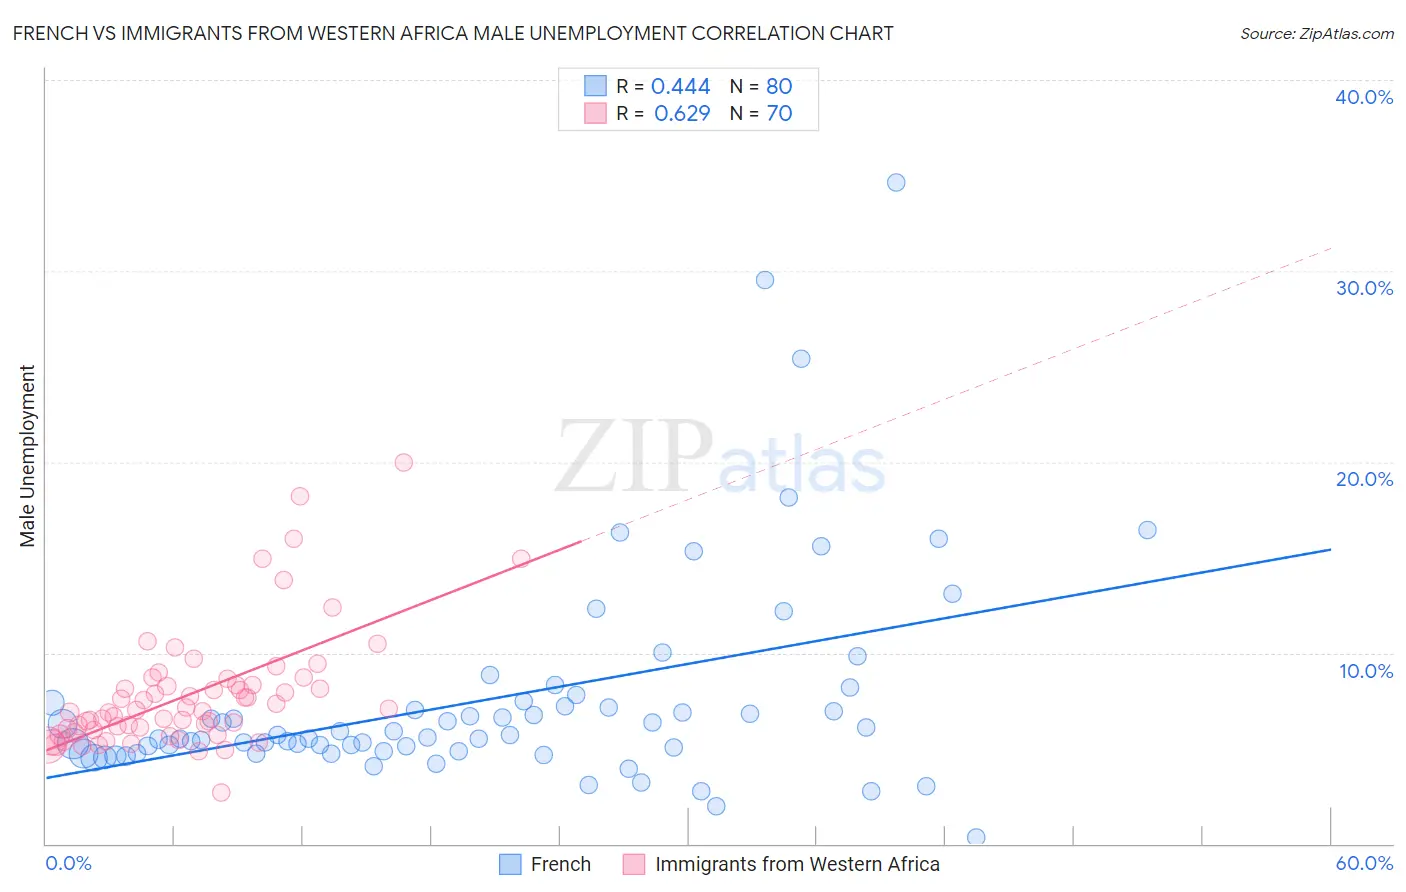 French vs Immigrants from Western Africa Male Unemployment